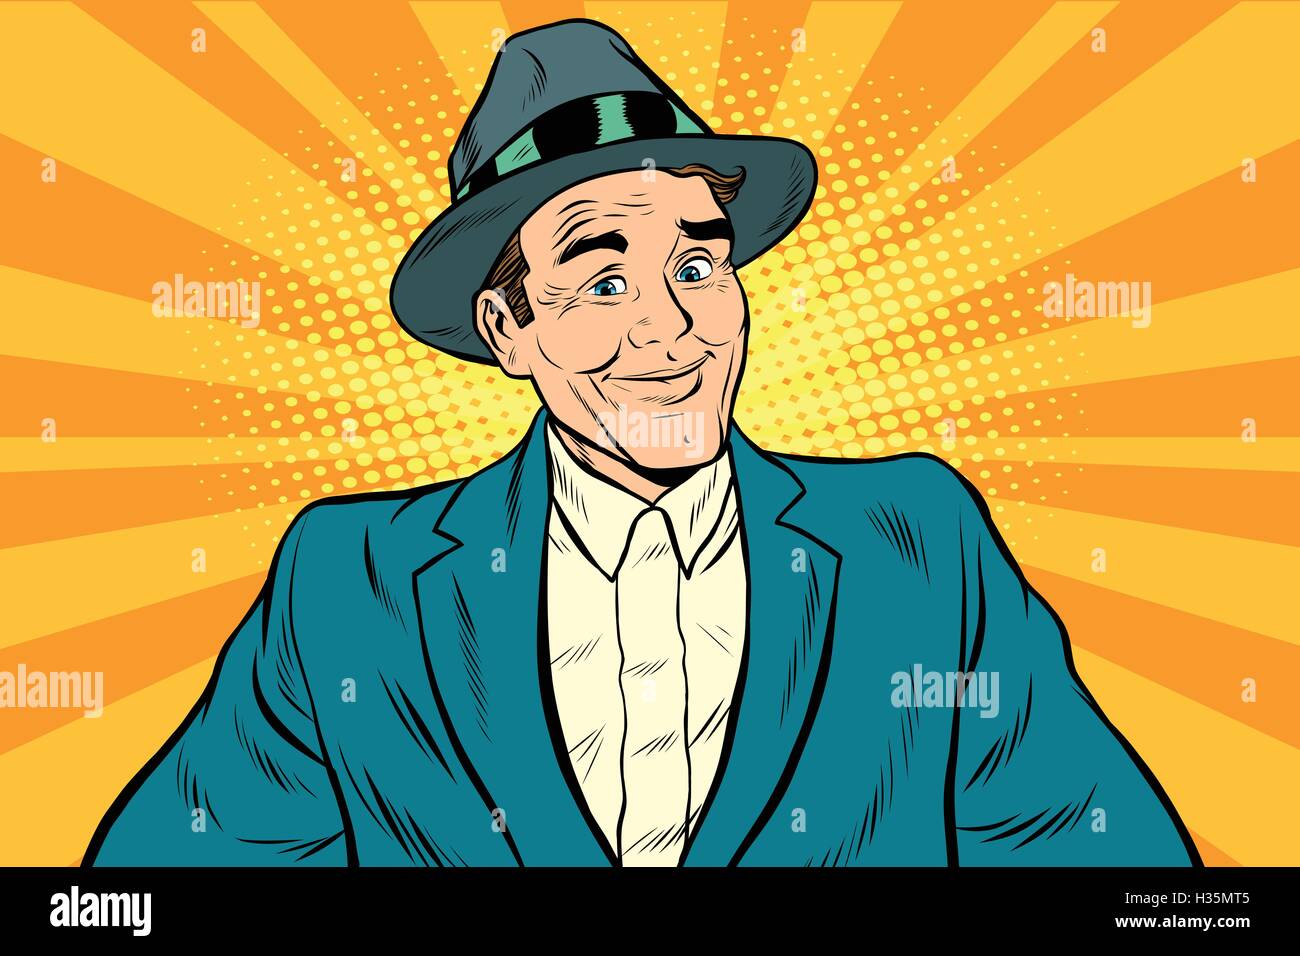 Smiling man without a tie Stock Vector